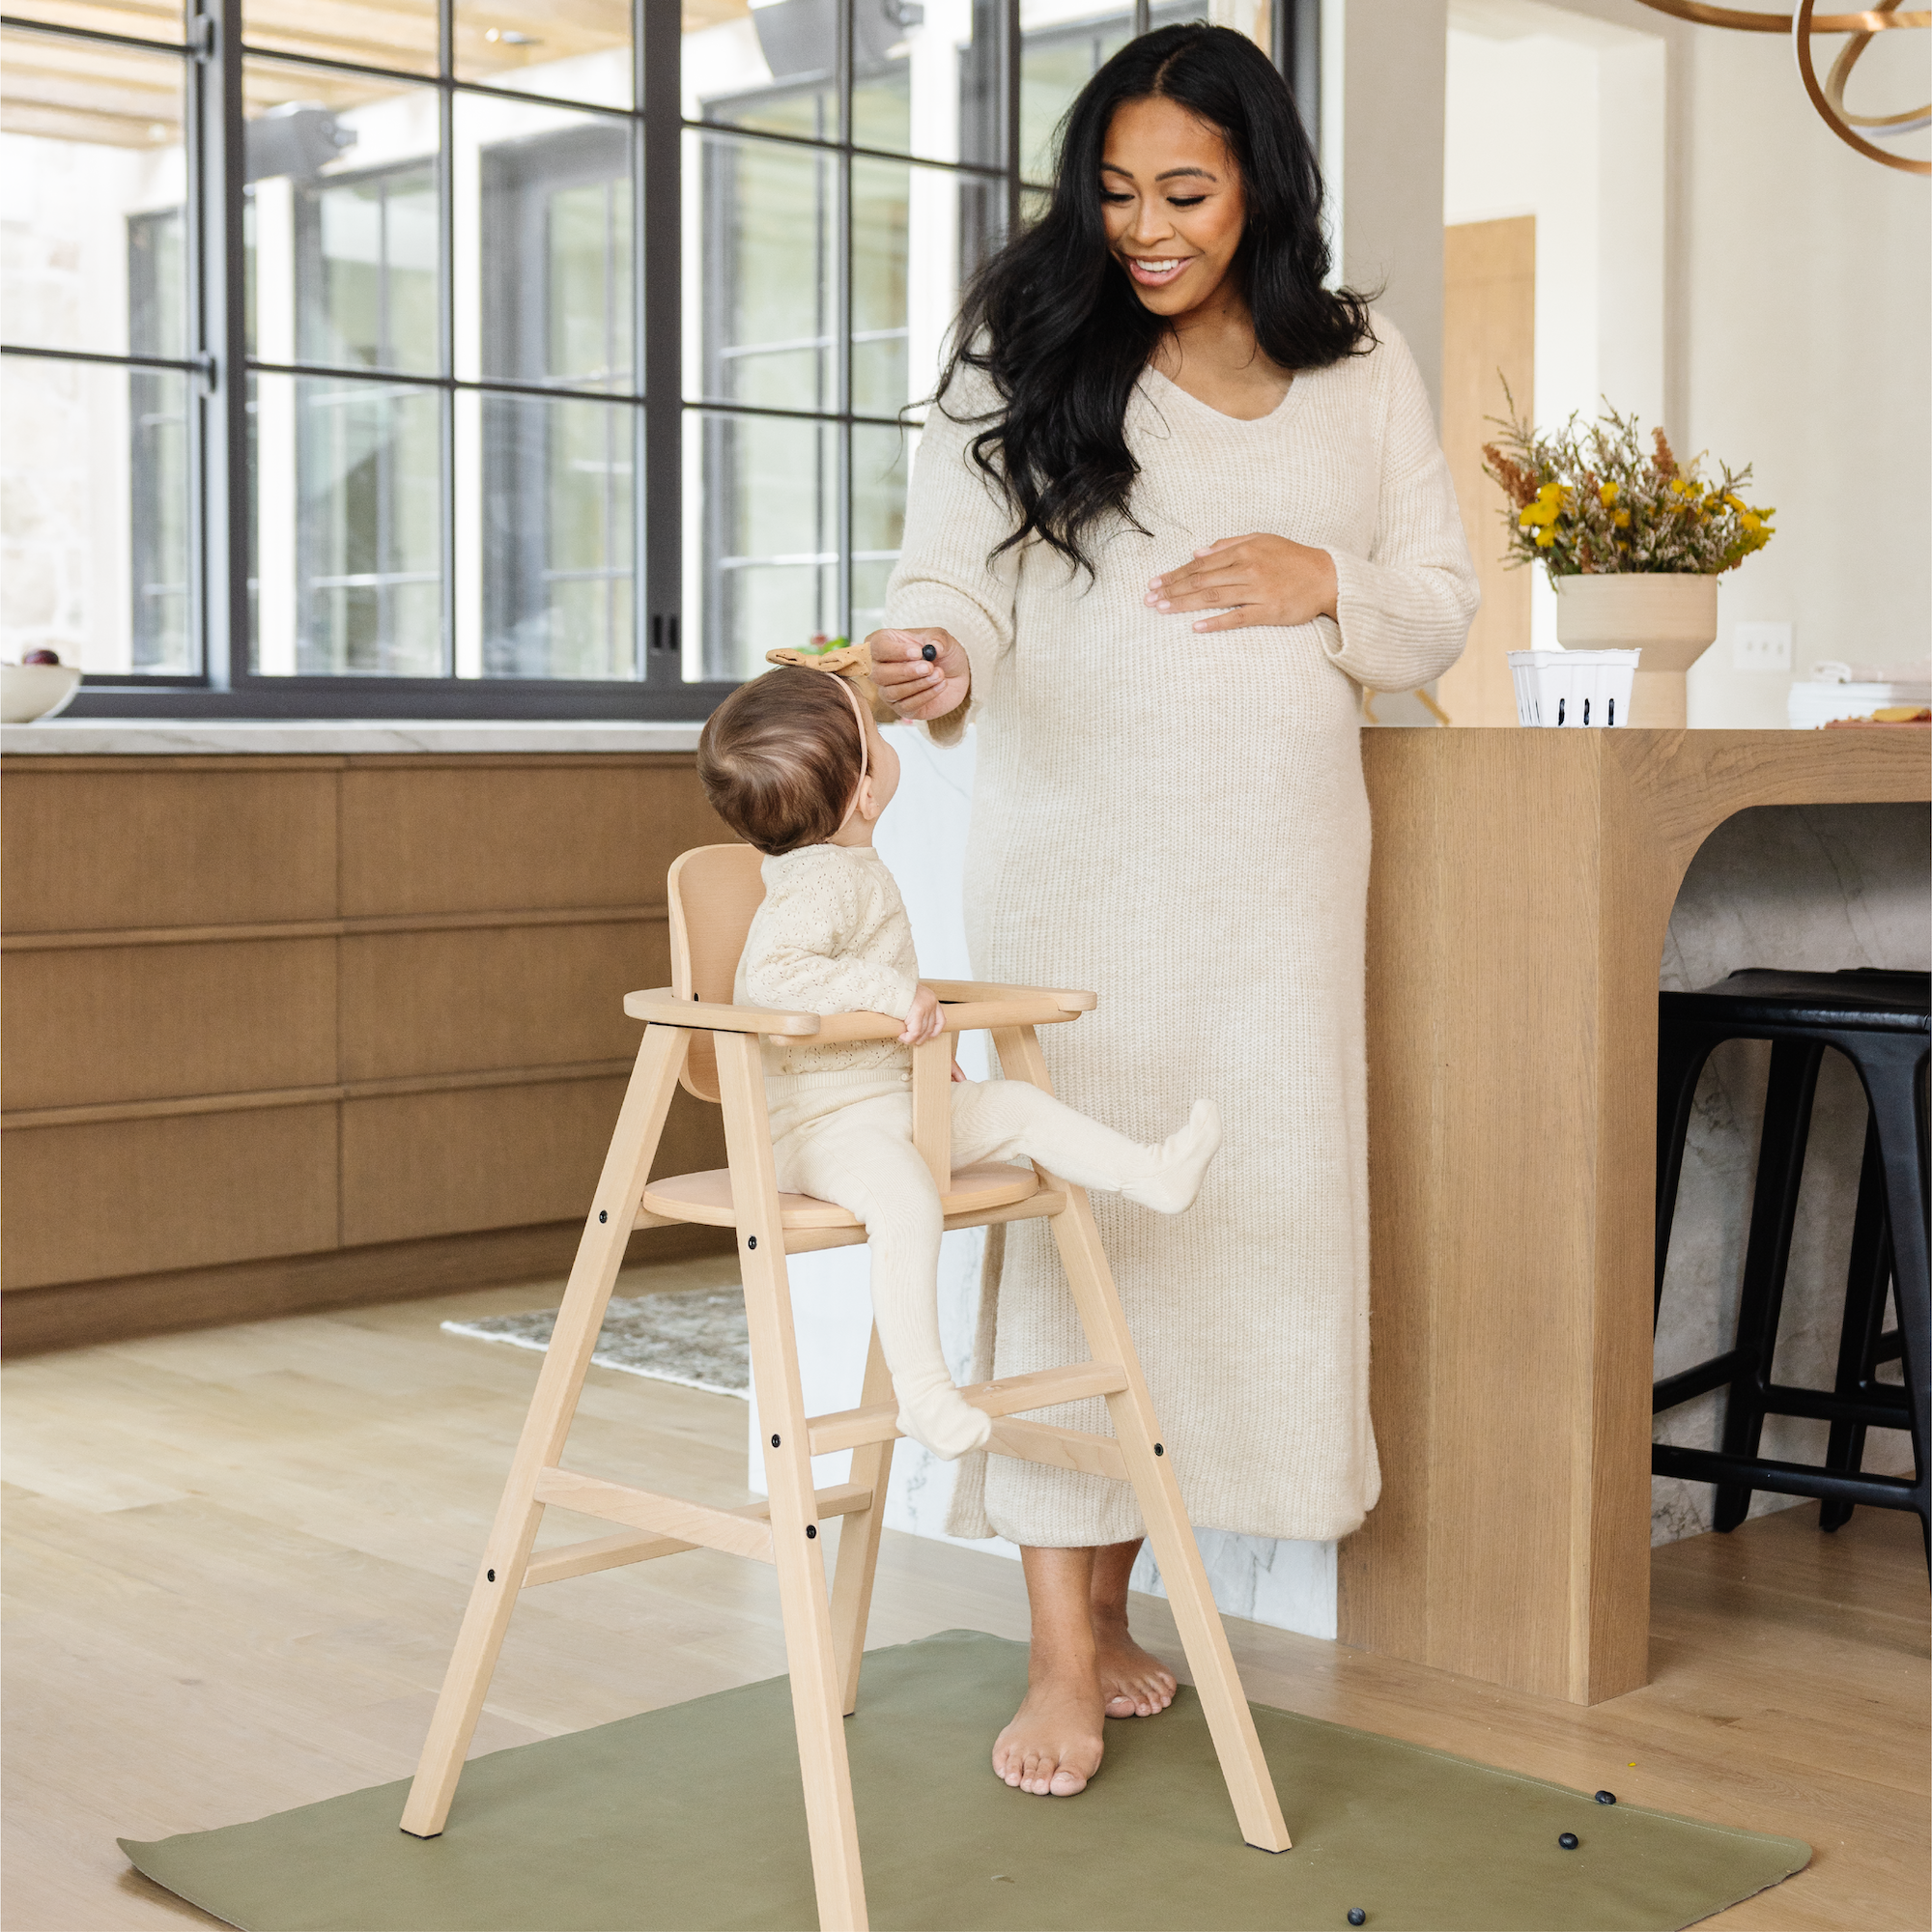 Fern (on sale)@Fern Mini Mat shown under highchair with mom and baby